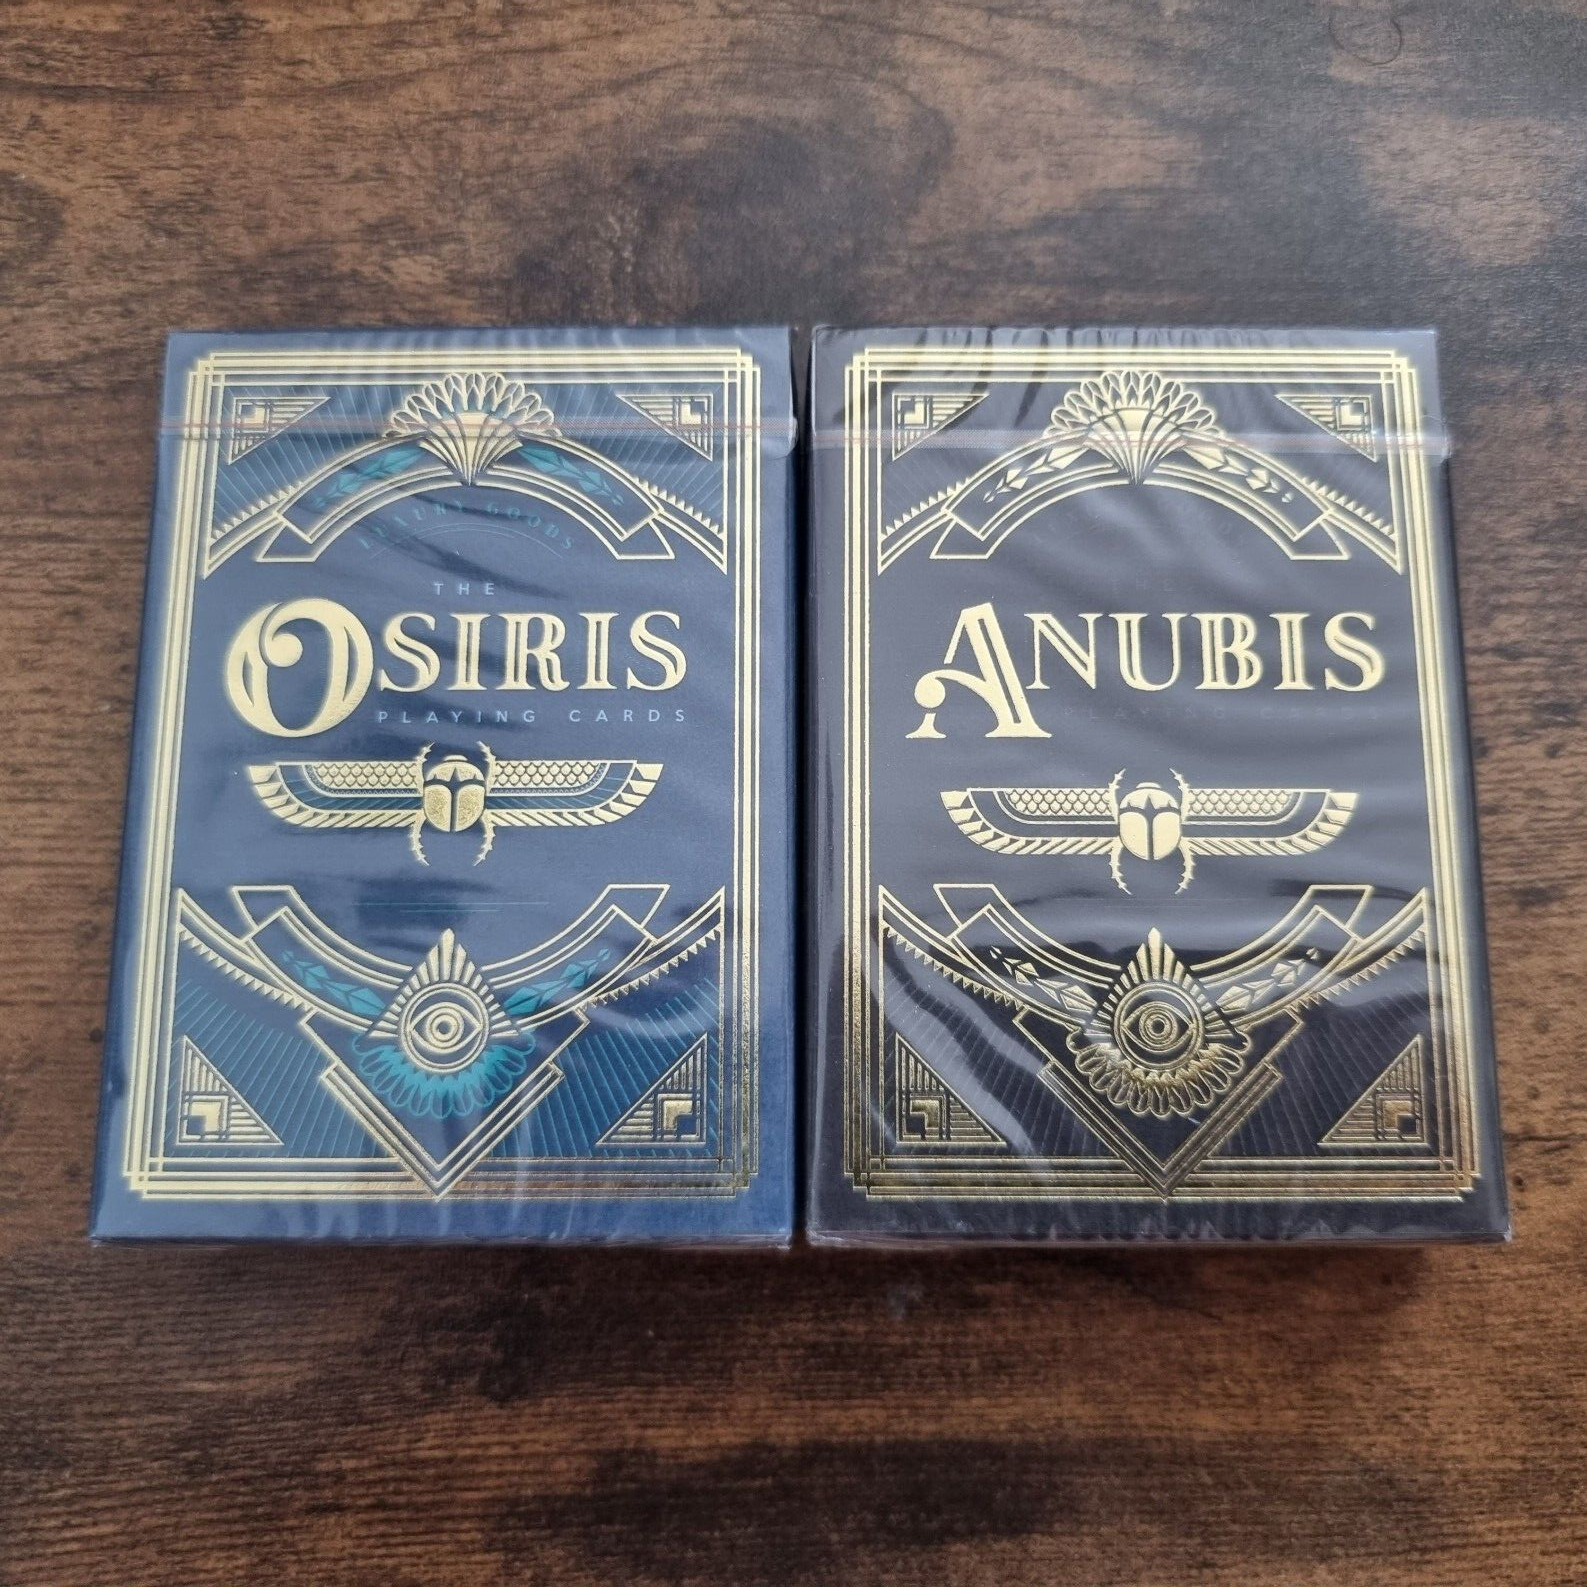 Osiris & Anubis 2 Deck Set New & Sealed Steve Minty Rare Limited Playing Cards